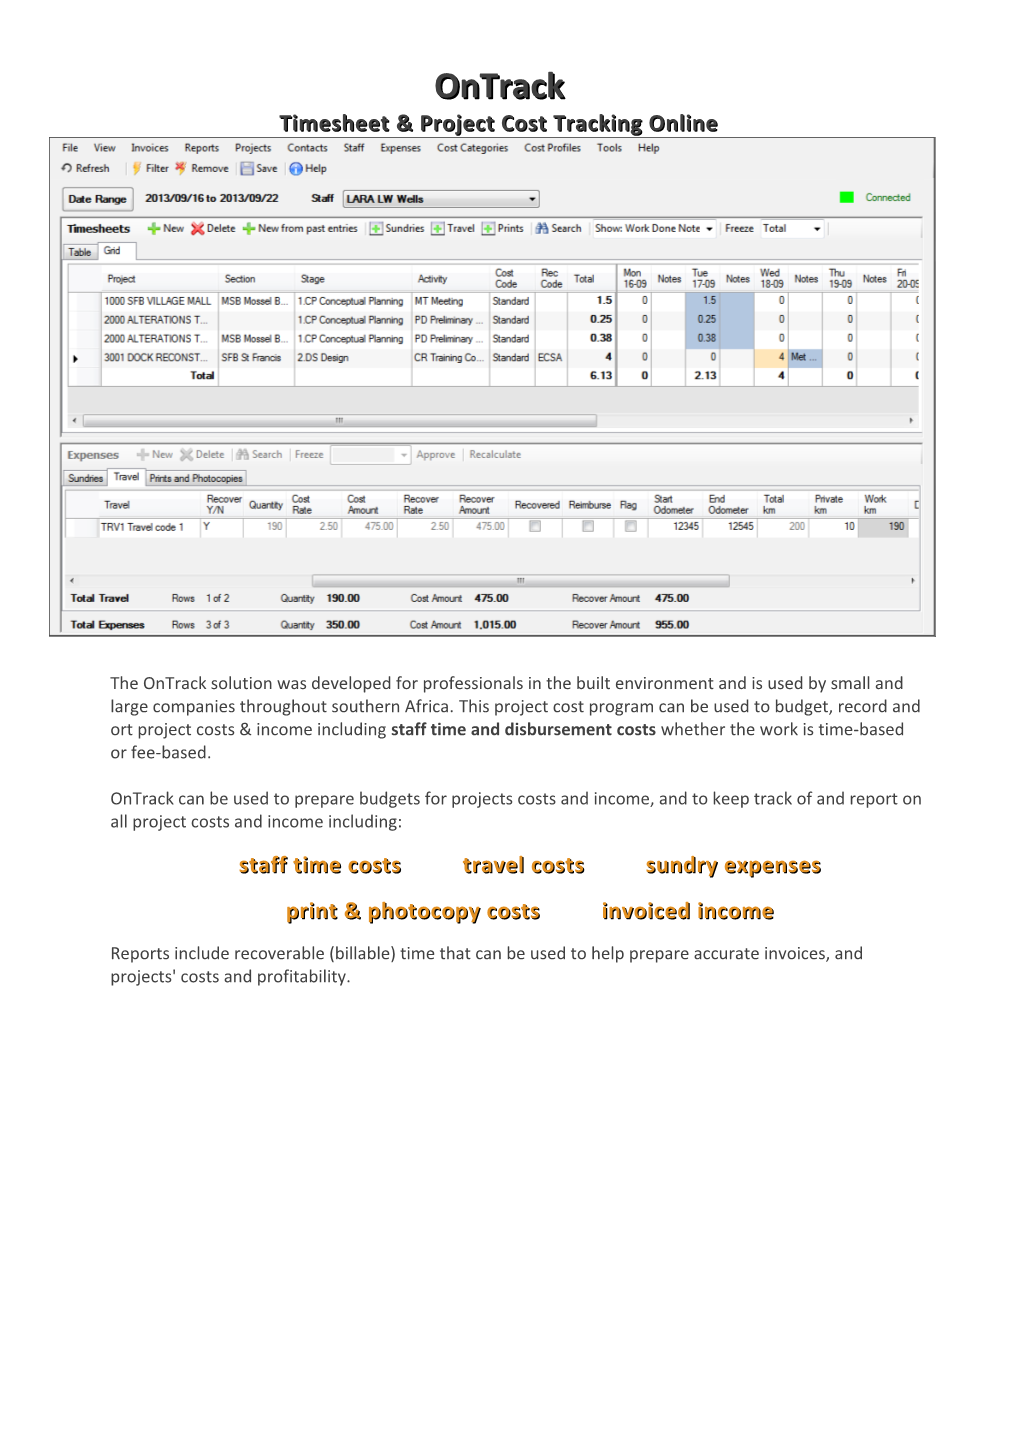 Timesheet & Project Cost Tracking Online